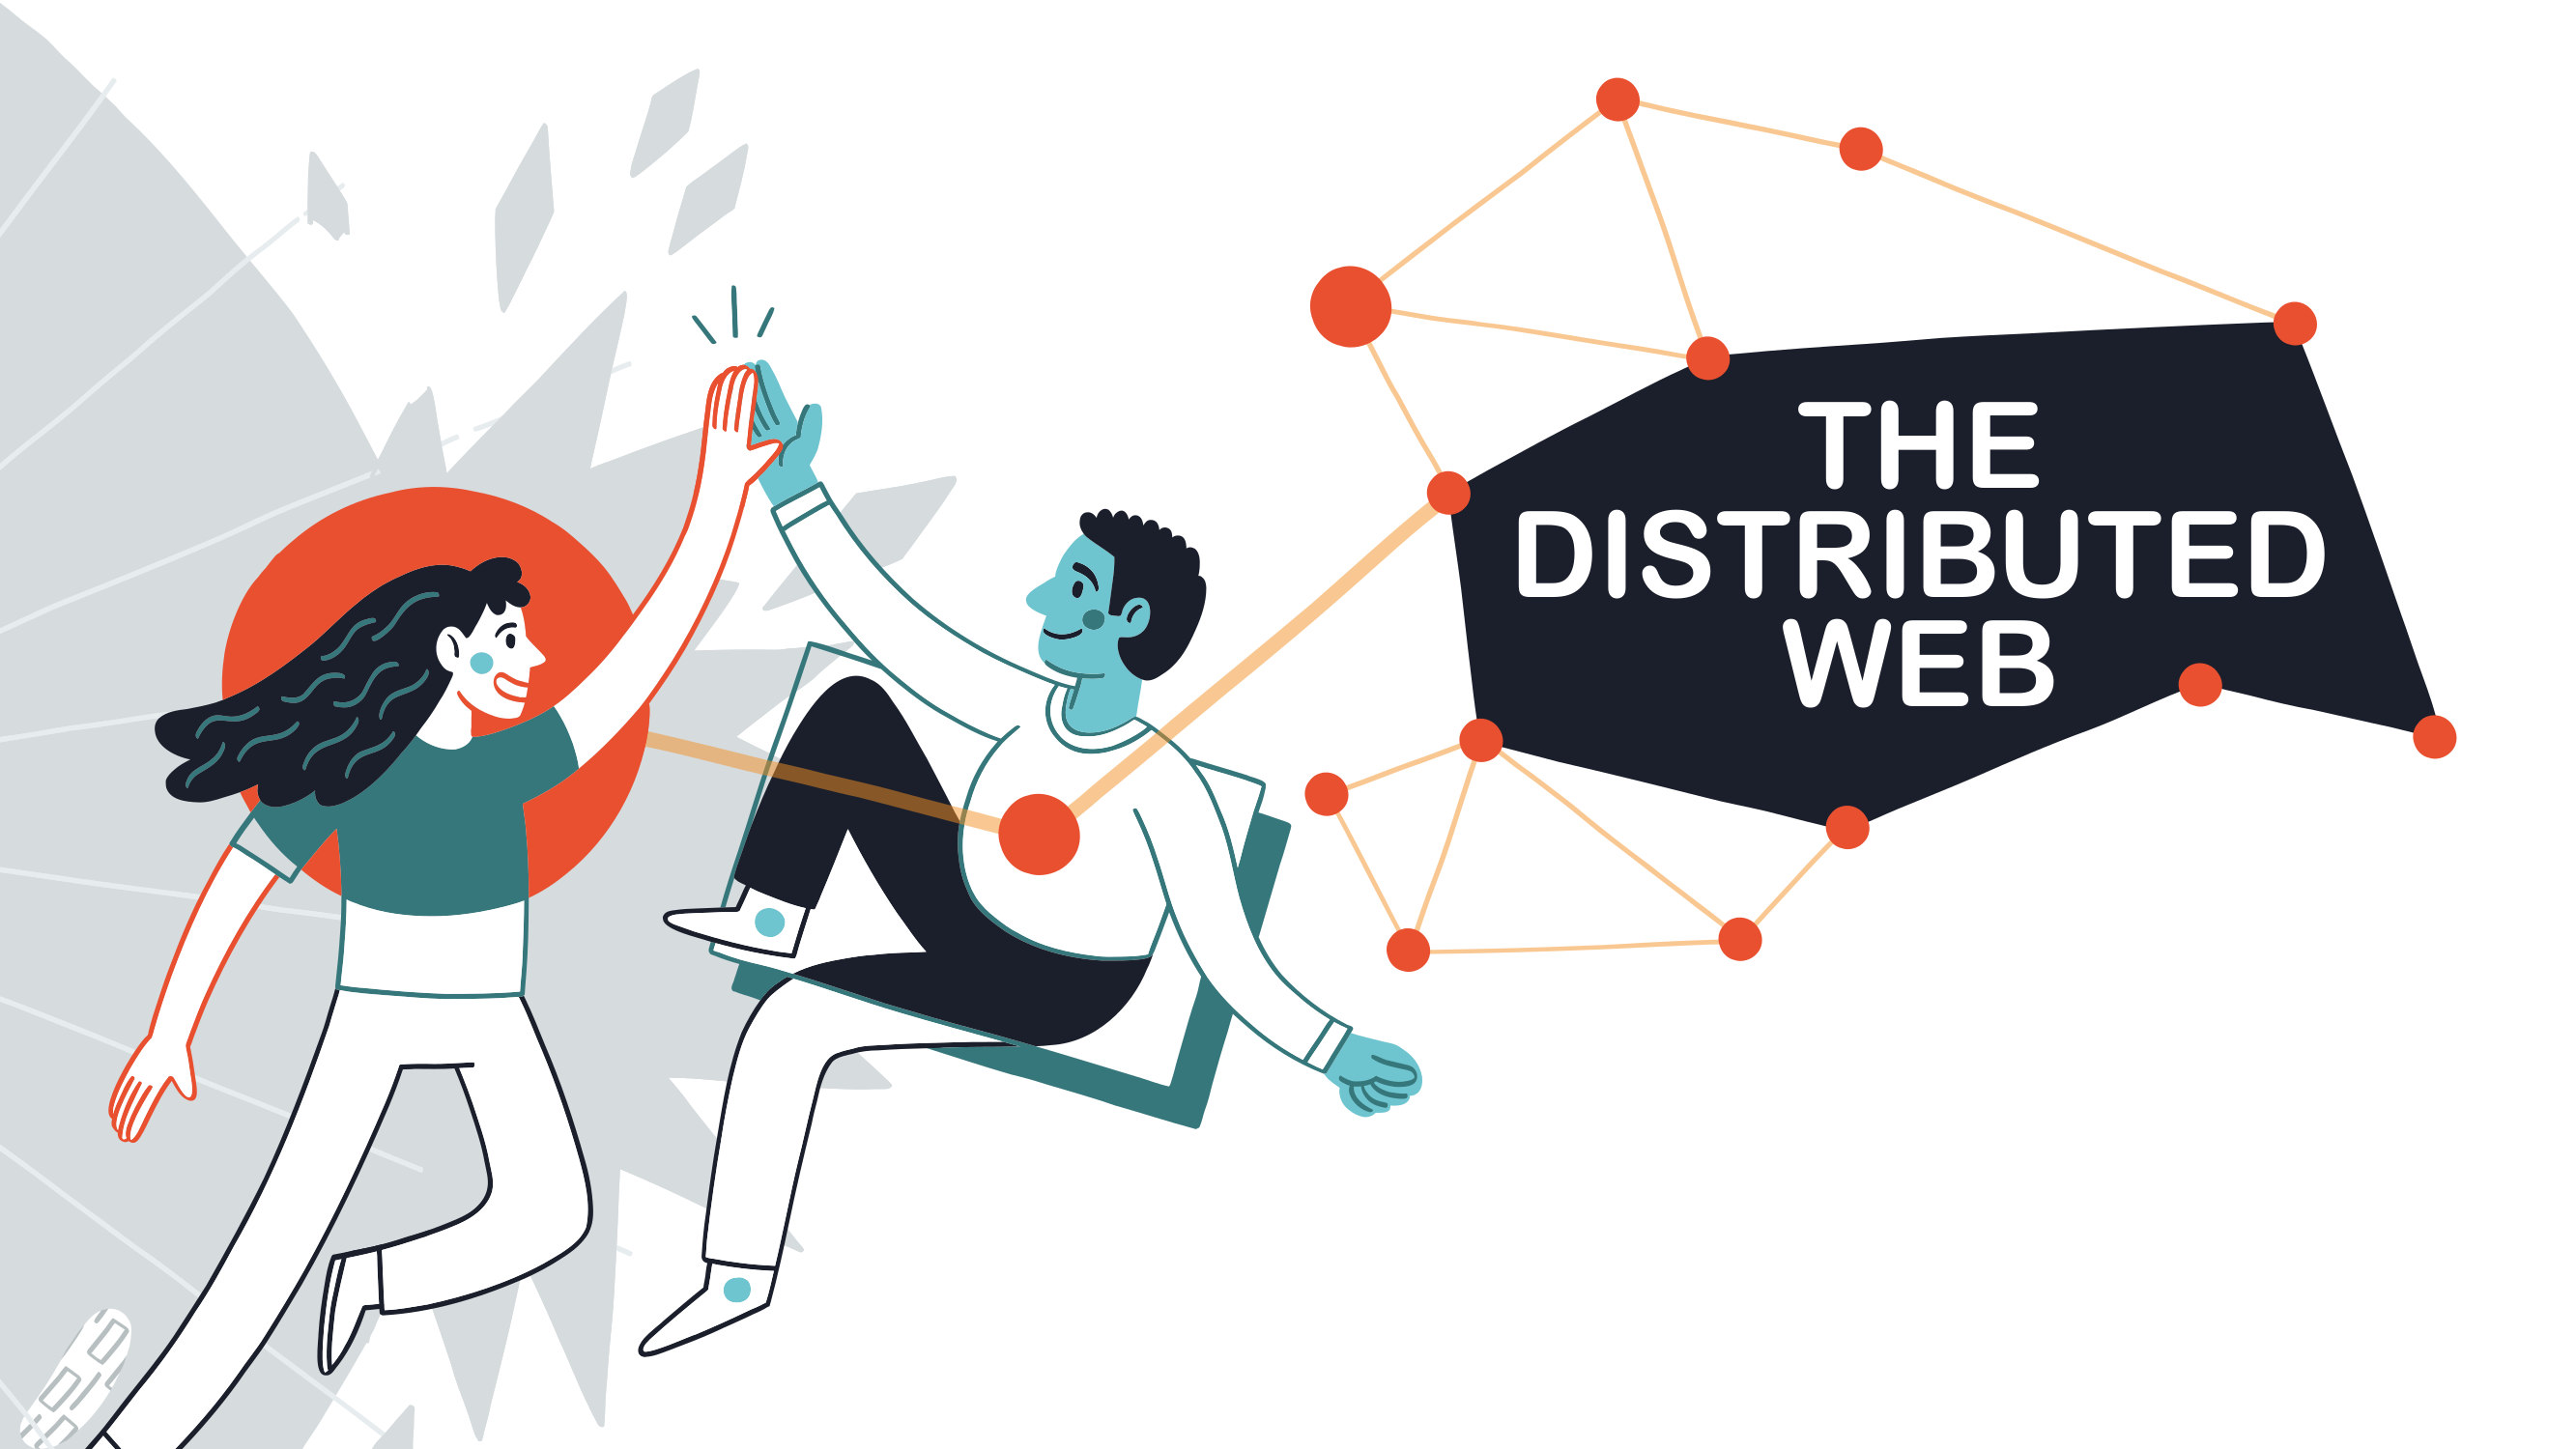 The distributed web